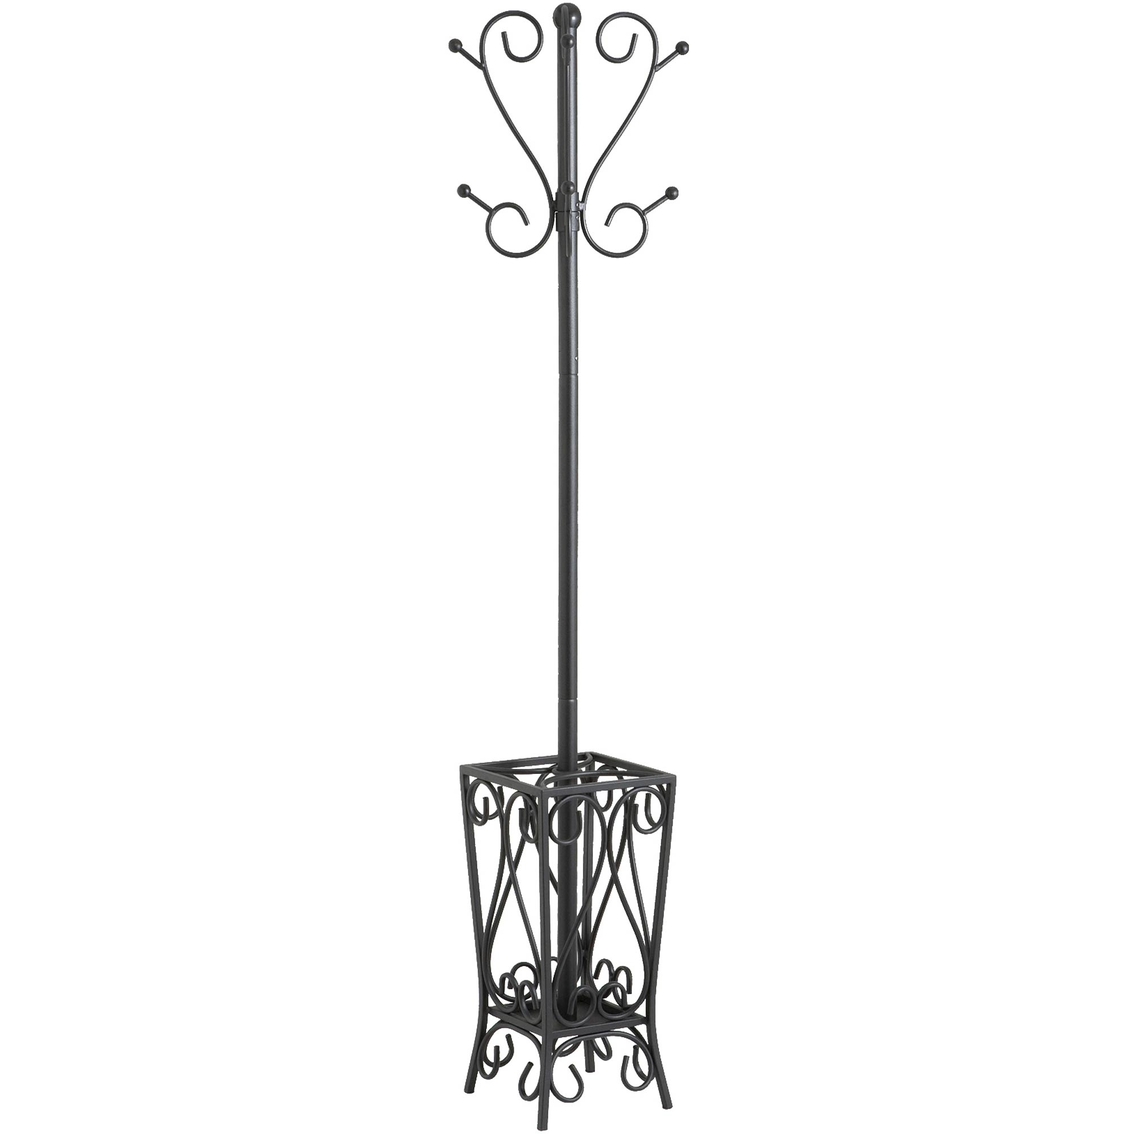 SEI Scrolled Coat Rack and Umbrella Stand - Image 4 of 4